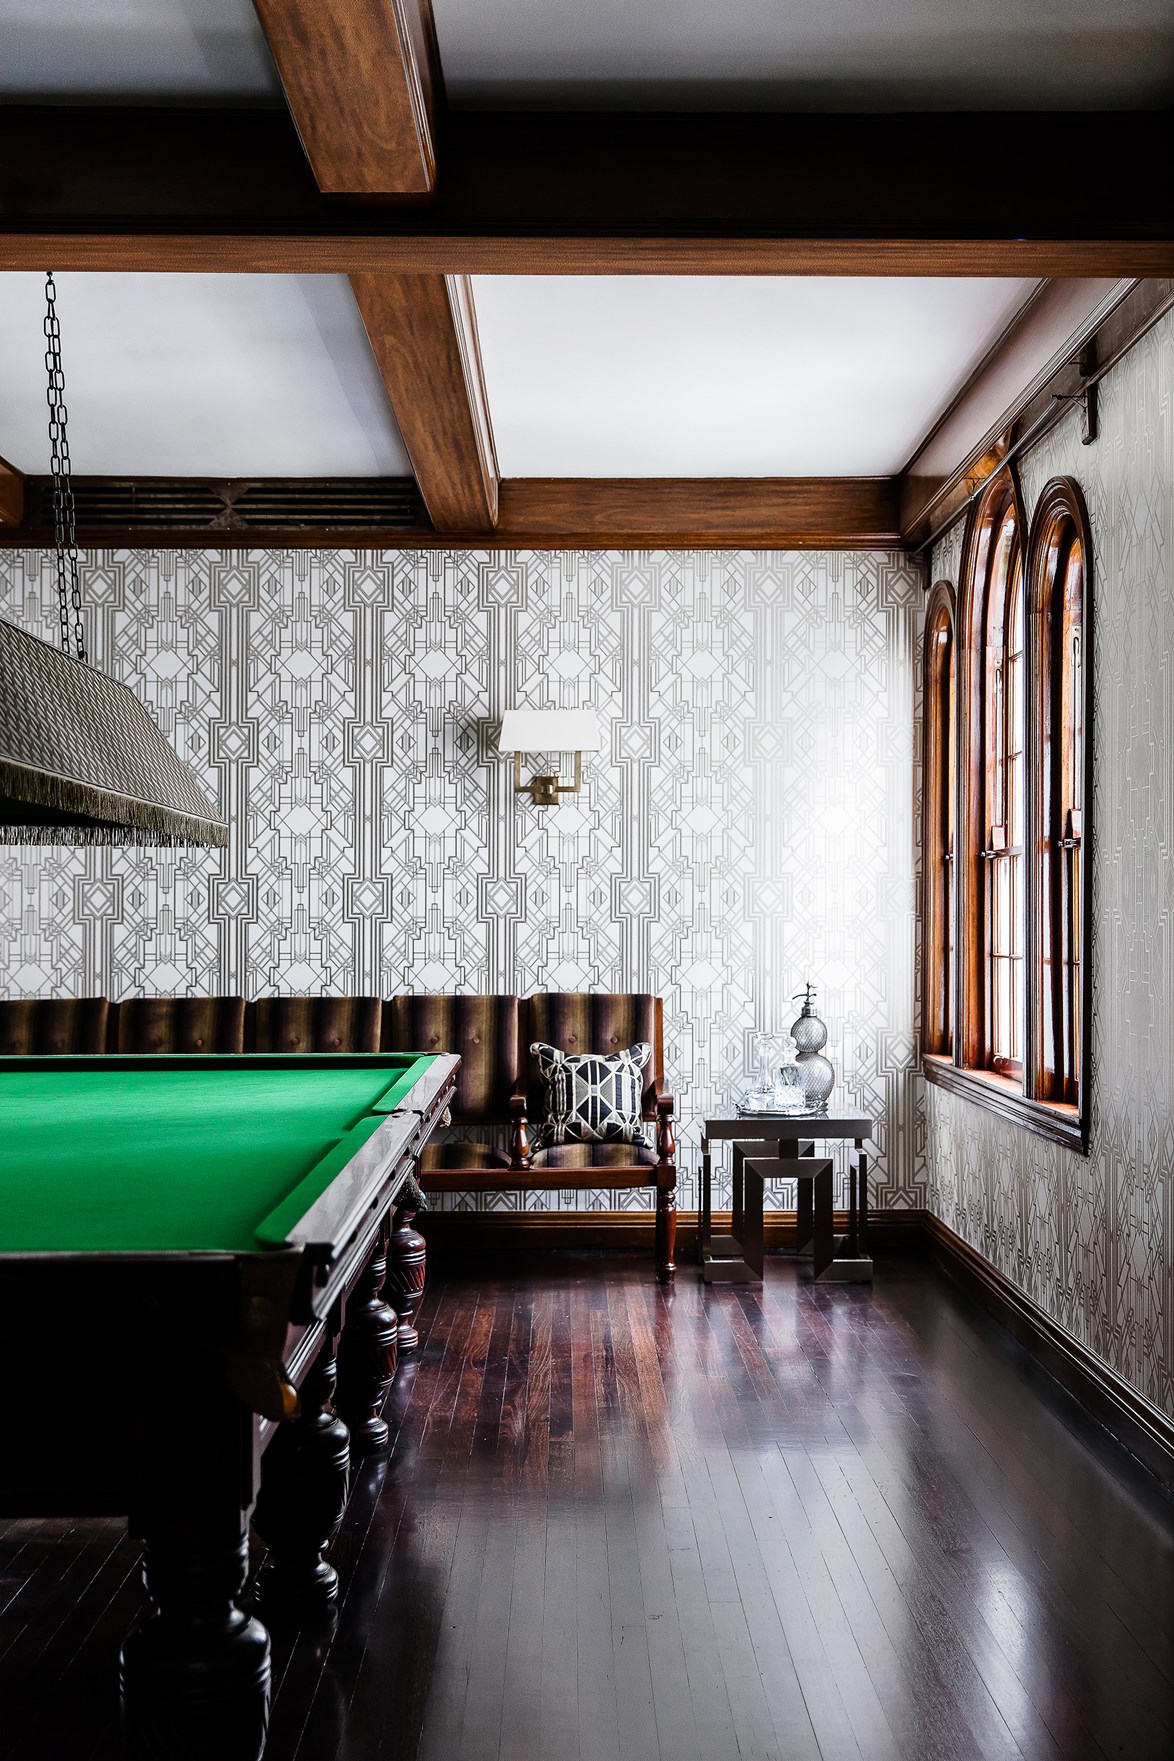 Taking design cues from it's heritage, the rumpus room in this early [20th-century home](http://www.homestolove.com.au/a-cheerful-and-kid-friendly-home-renovation-3774), has been wallpapered in an art-deco style print. When paired with exposed beams and trimmings, this style of wallpaper creates a sense of grandeur and old-world charm.